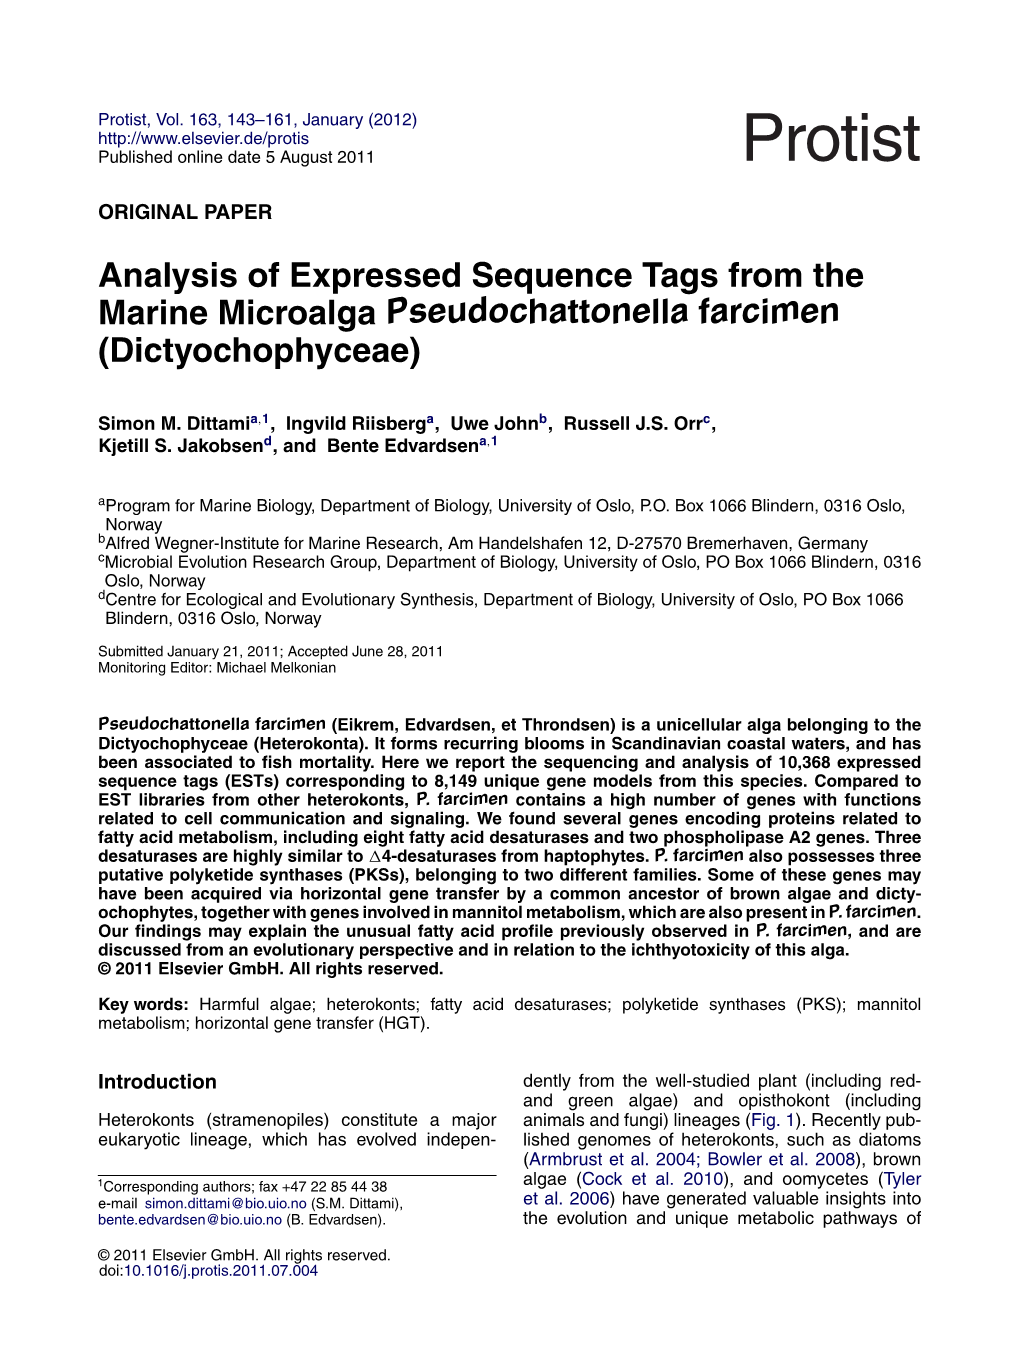 Analysis of Expressed Sequence Tags from the Marine Microalga